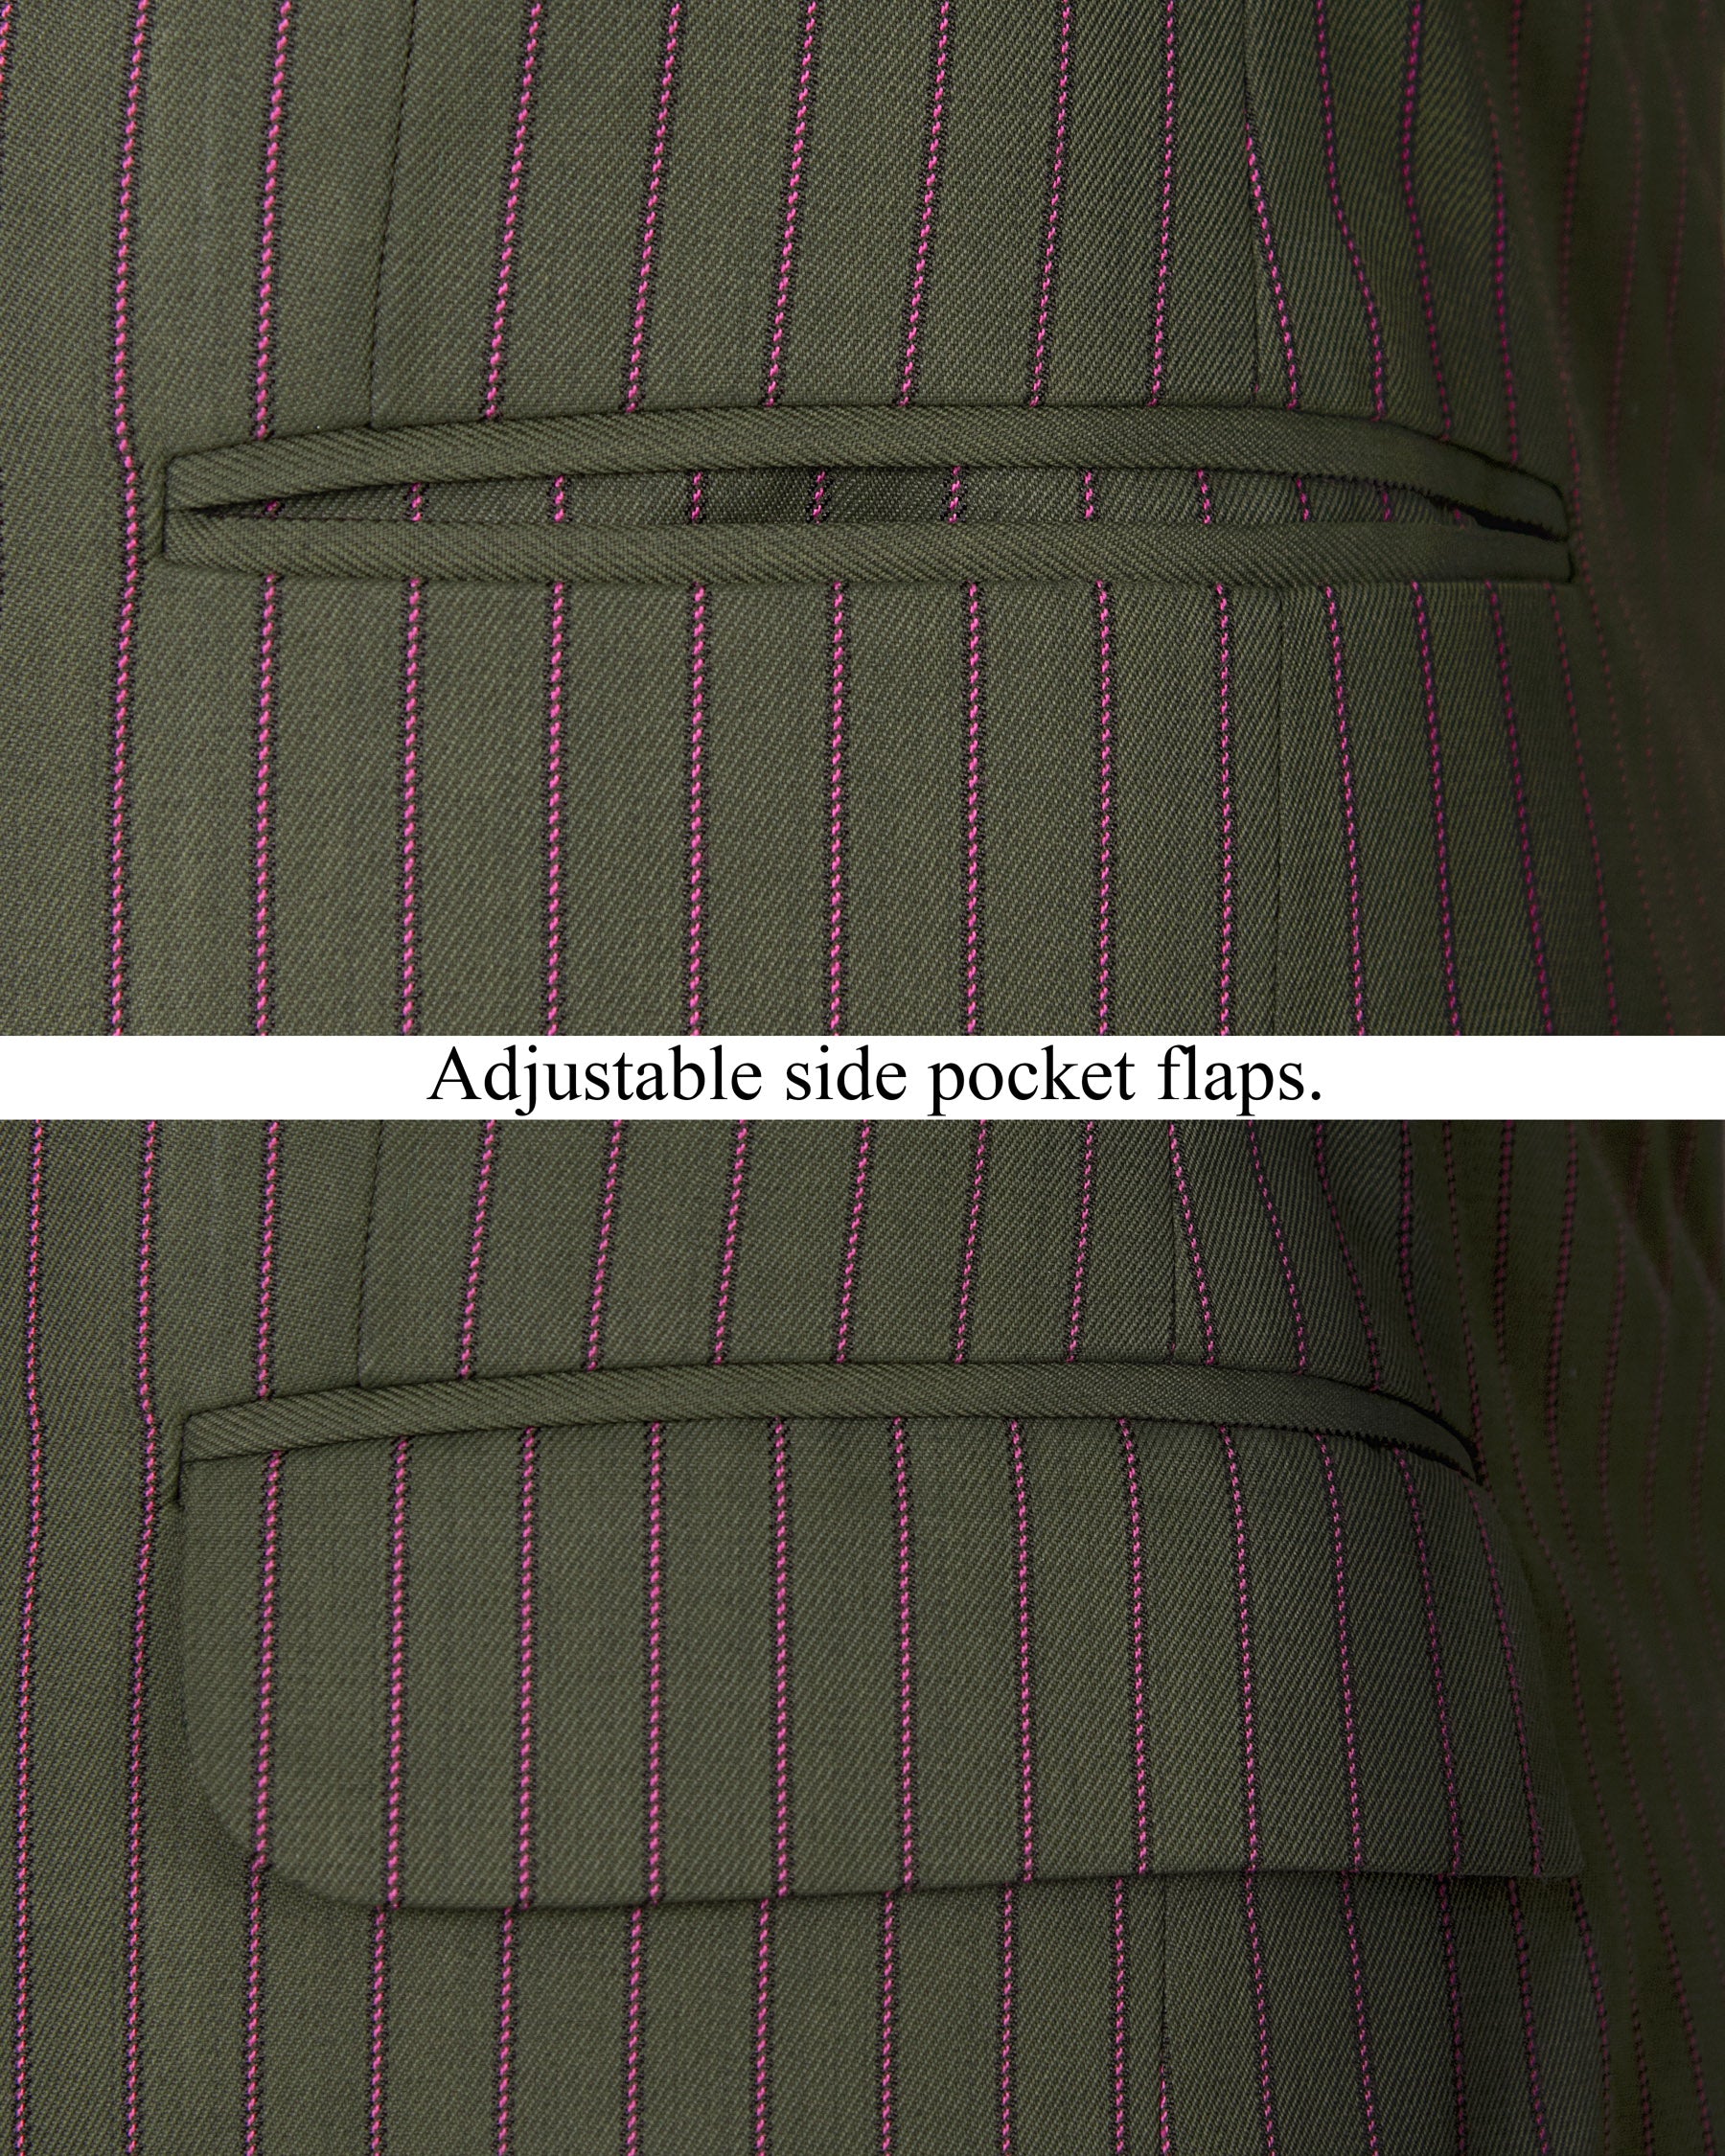 Kelp Green and Mulberry Pink Striped Woolrich Blazer BL1291-SBP-36, BL1291-SBP-38, BL1291-SBP-40, BL1291-SBP-42, BL1291-SBP-44, BL1291-SBP-46, BL1291-SBP-48, BL1291-SBP-50, BL1291-SBP-52, BL1291-SBP-54, BL1291-SBP-56, BL1291-SBP-58, BL1291-SBP-60